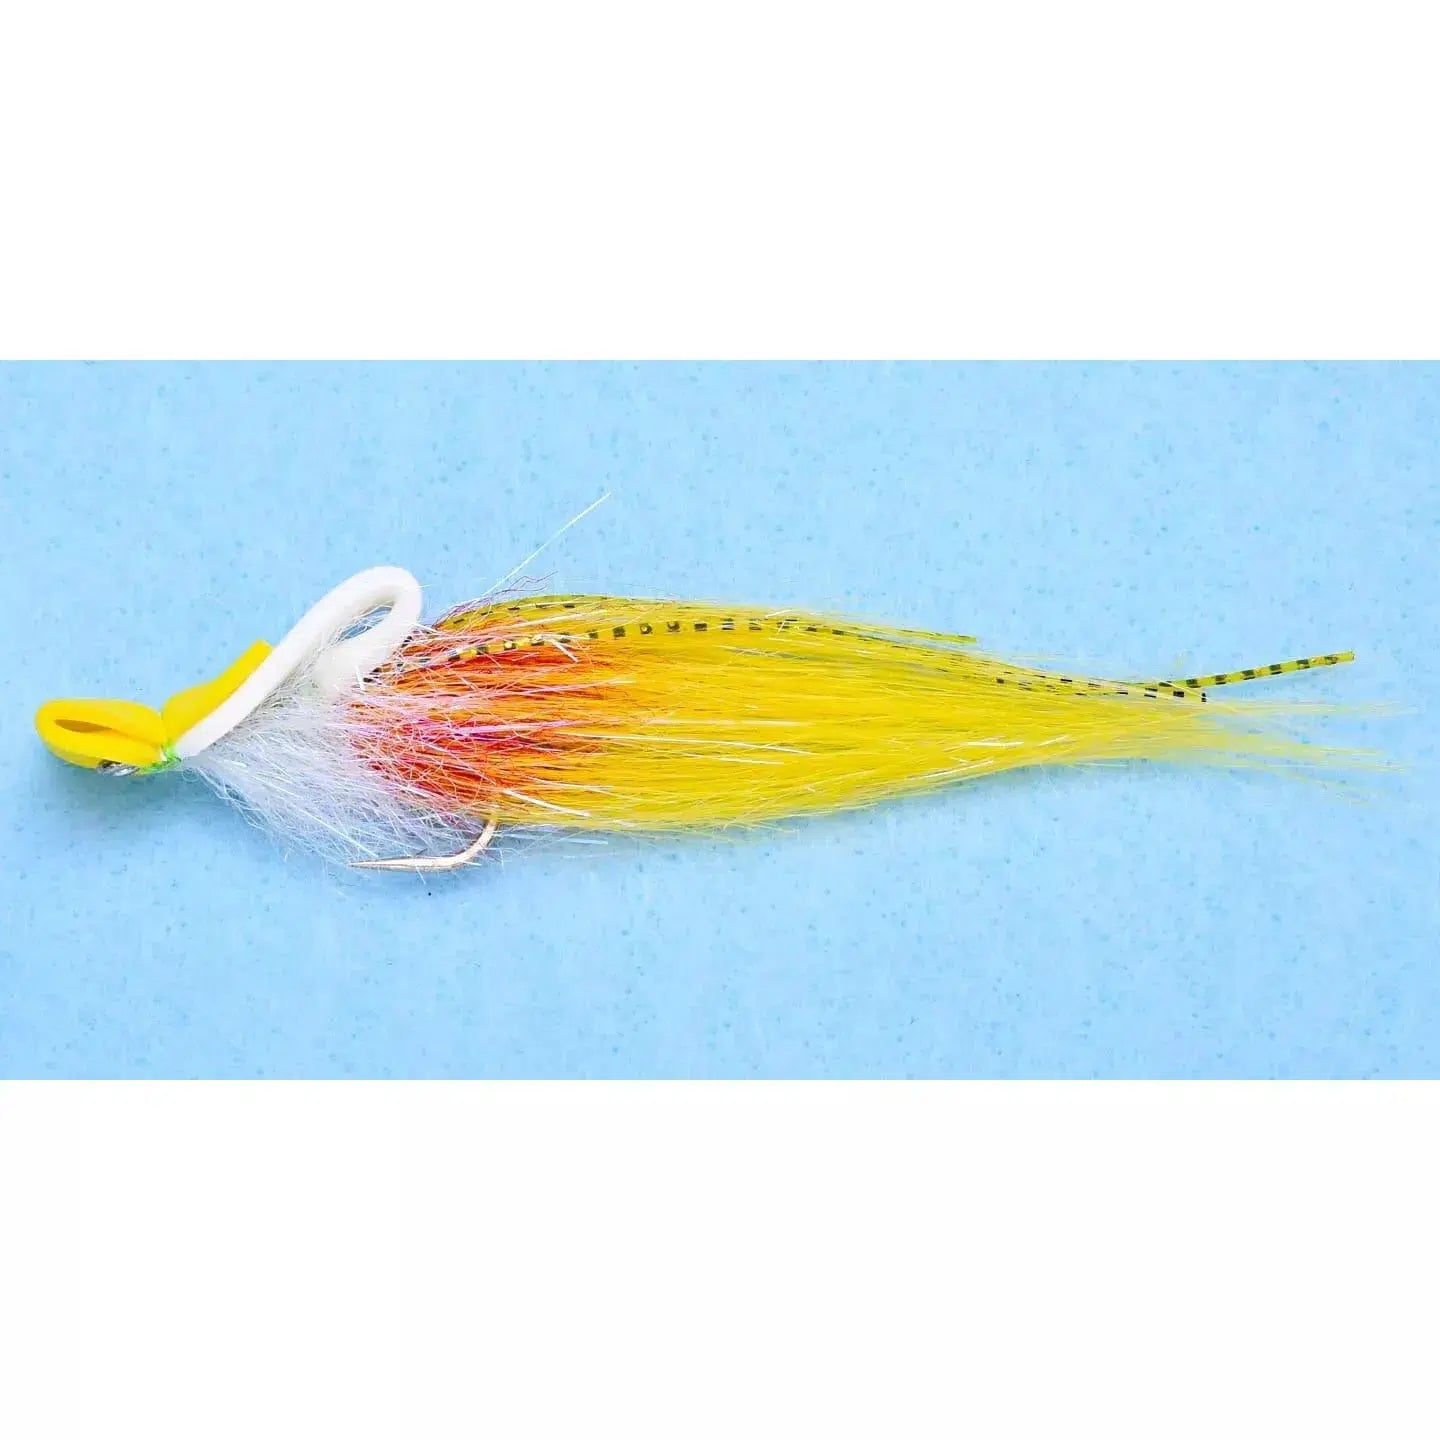 Enrico Puglisi Top Water Shrimp Fly-Lure - Saltwater Fly-Enrico Puglisi-White/Yellow-Size #2/0-Fishing Station